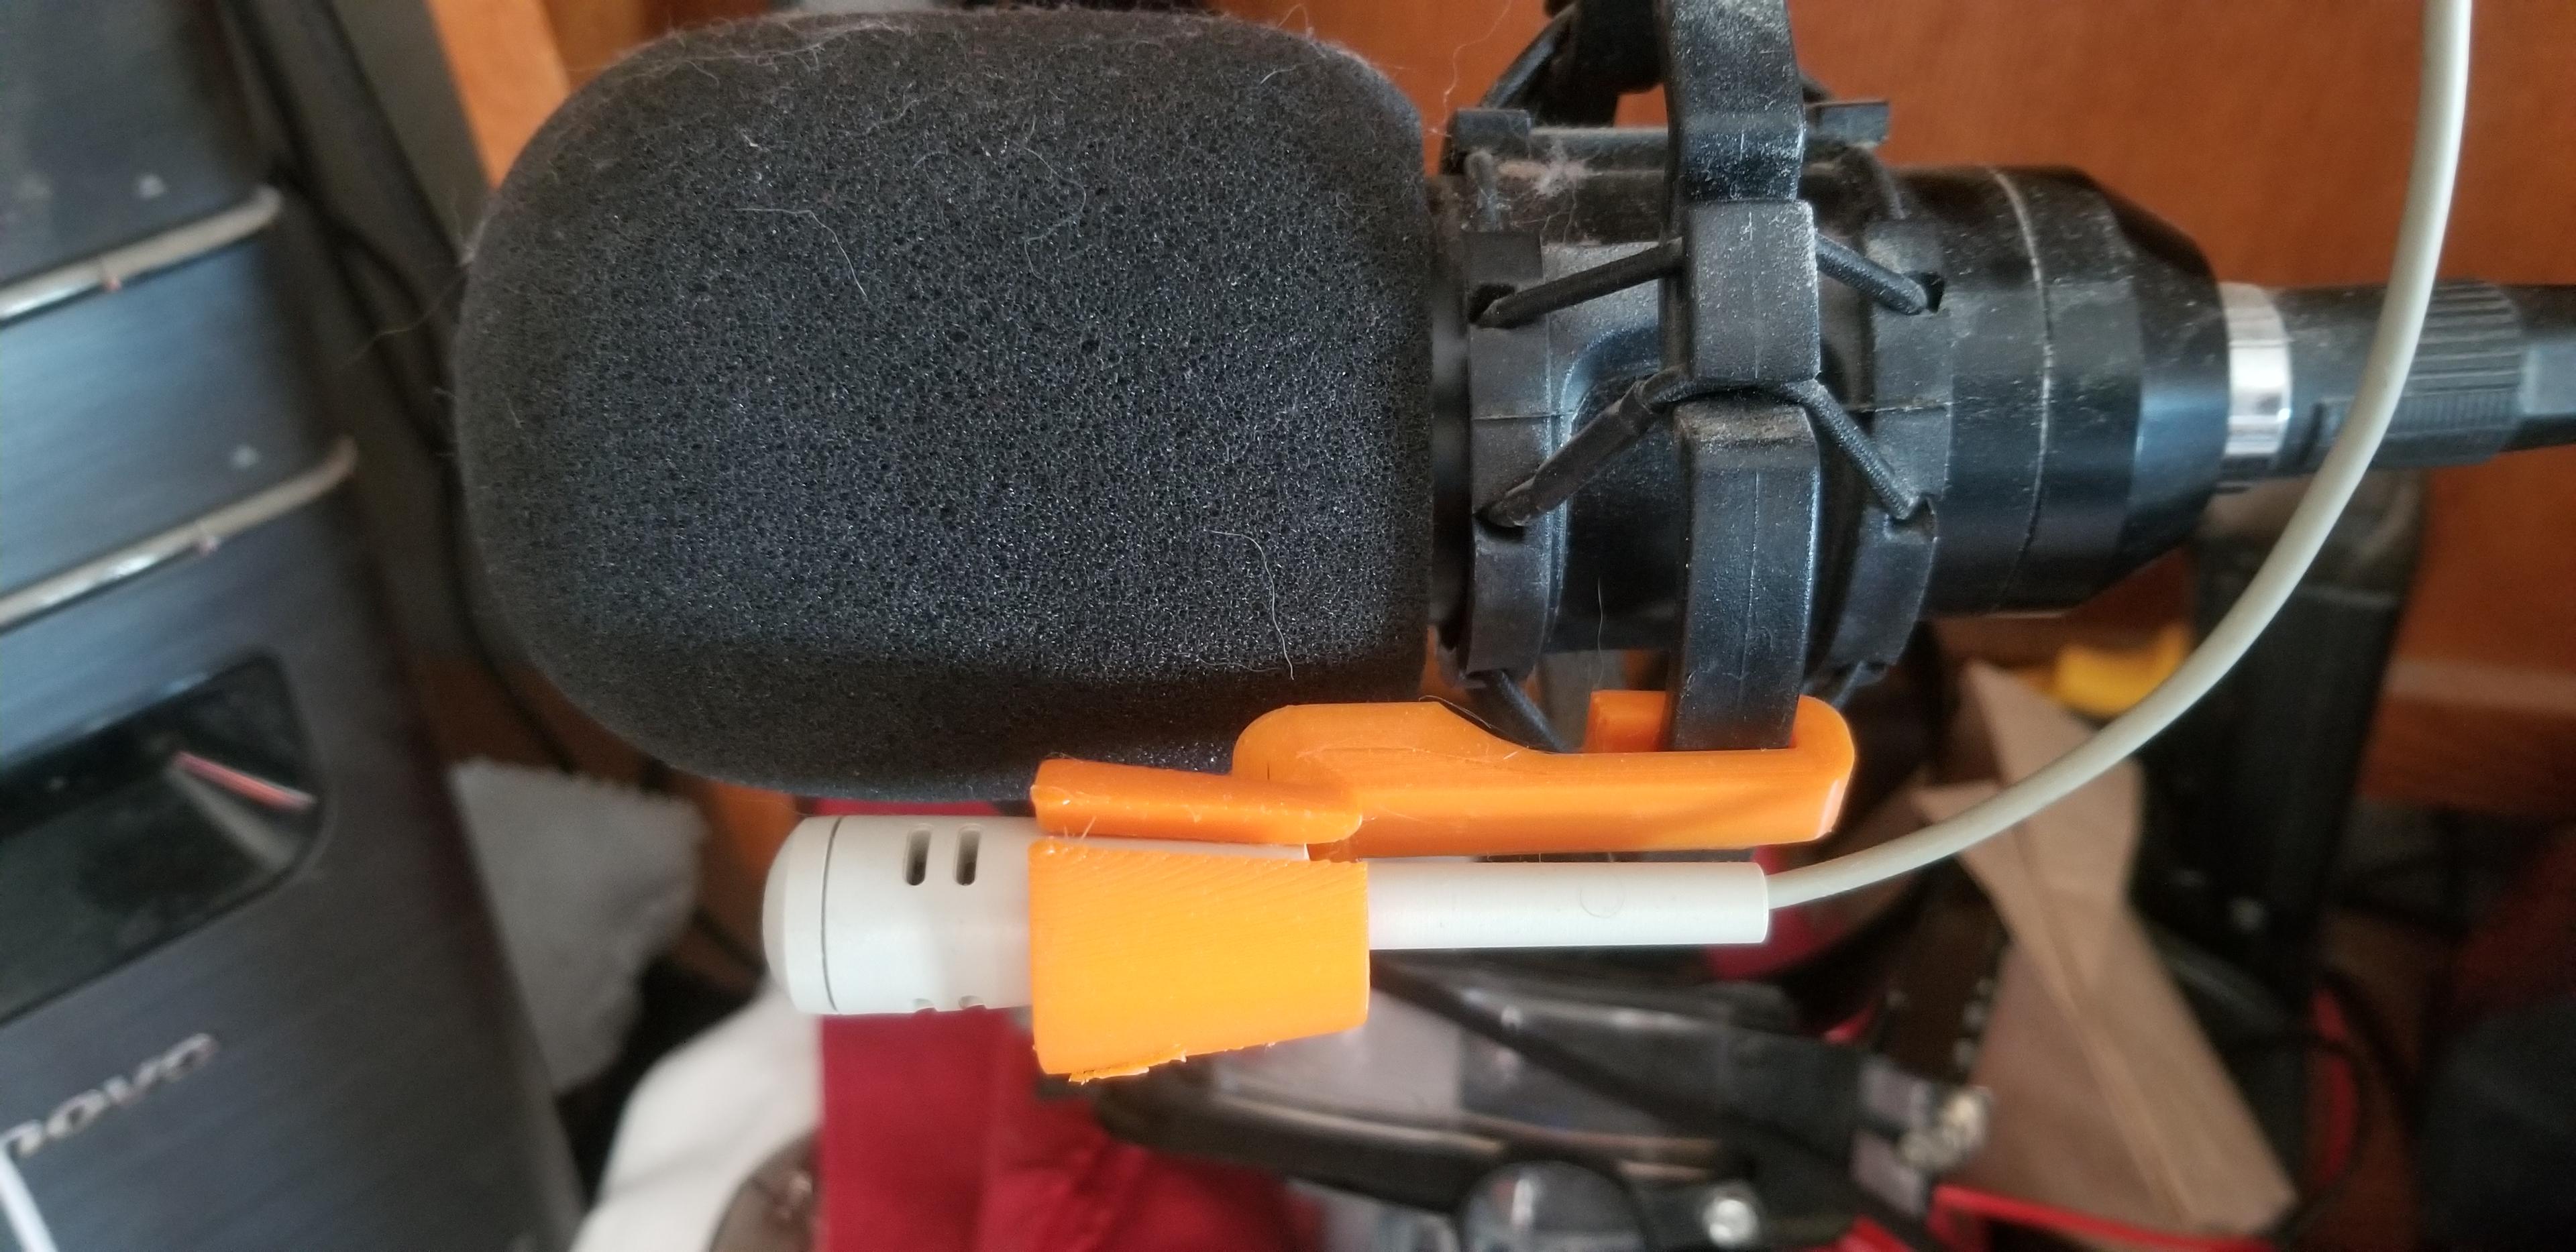 PC Microphone Holder - Clip on to Newer Mic Holder 3d model